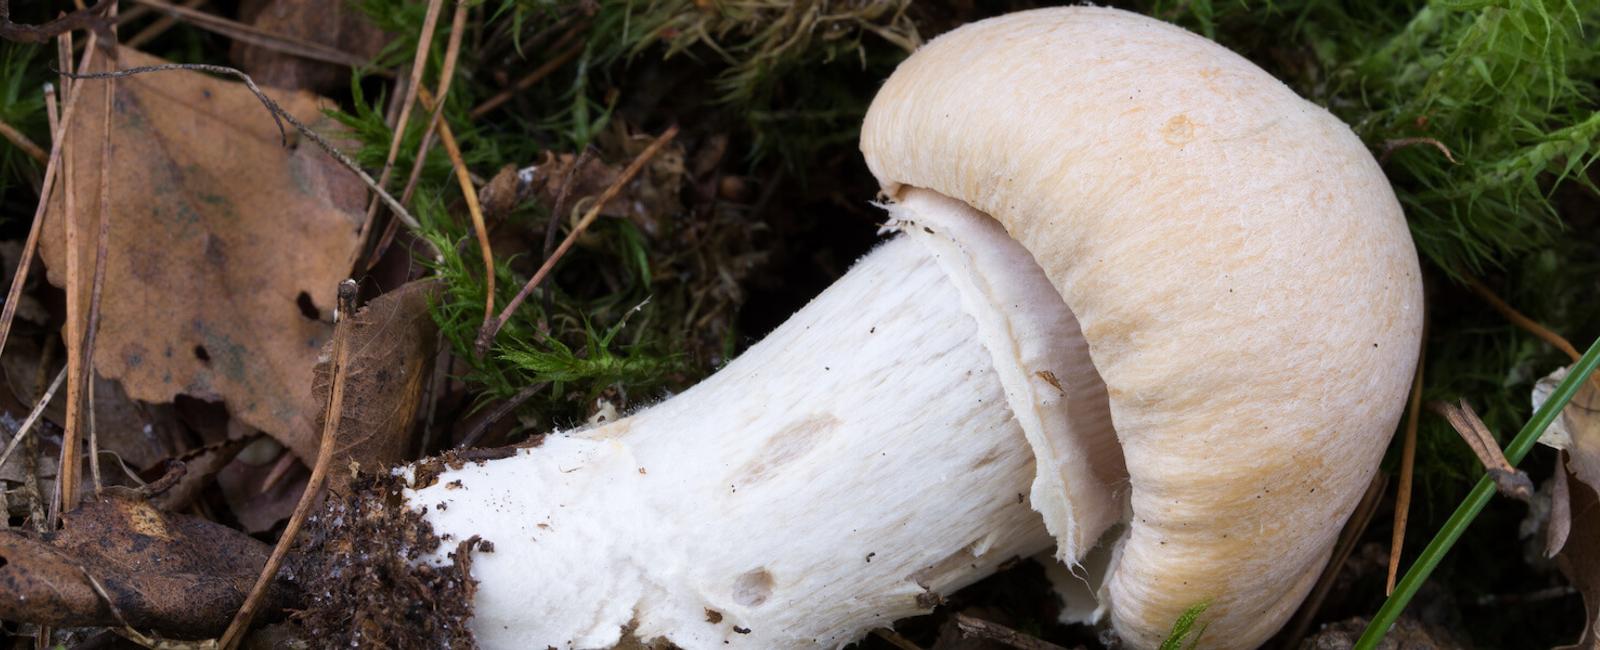 The Complete Guide to Gypsy Mushroom